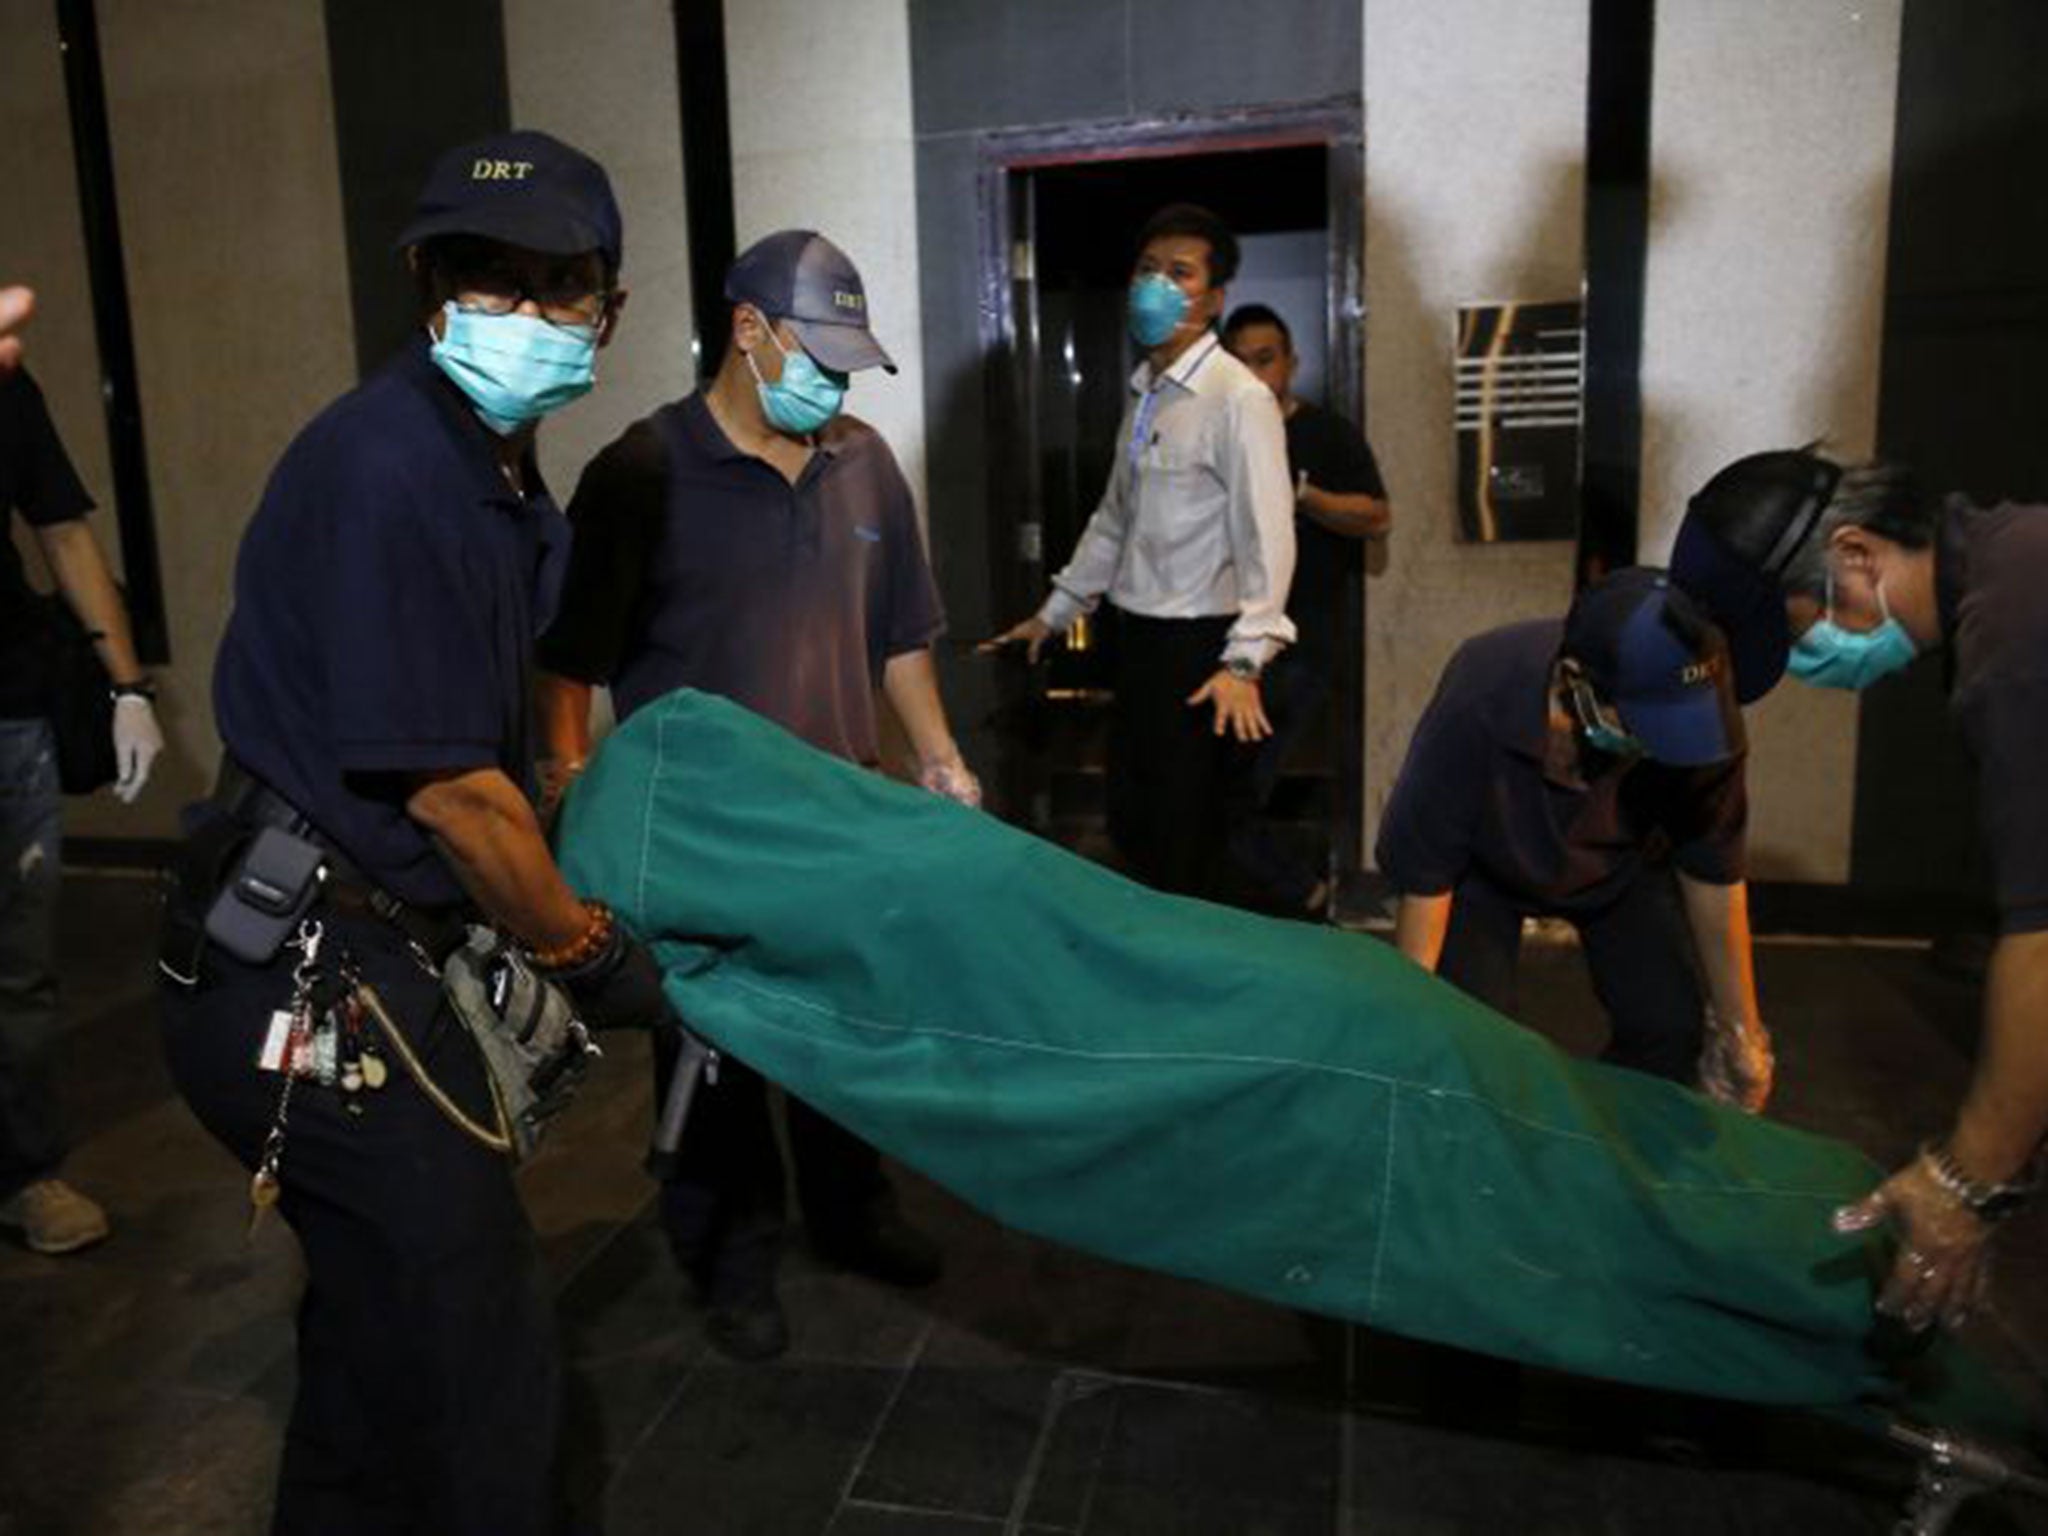 One of the women found discovered at the flat in the Wan Chai district was found inside a suitcase